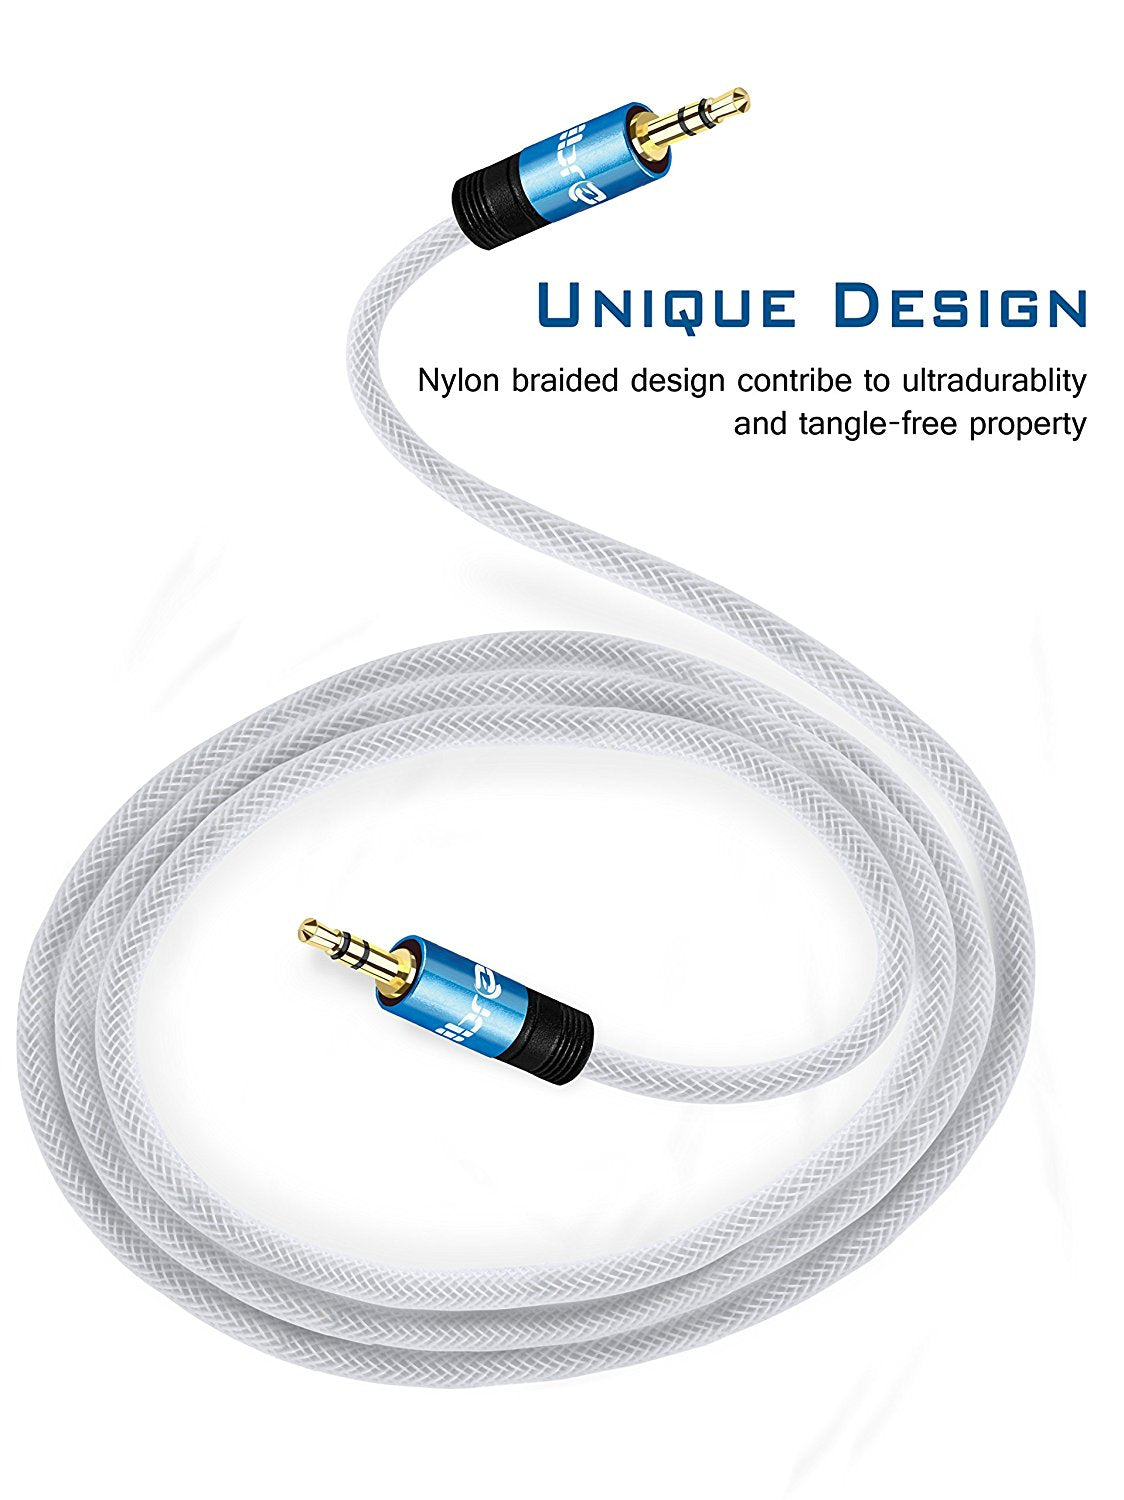 3m White Slim 3.5mm Stereo Audio Cable - Male to Male